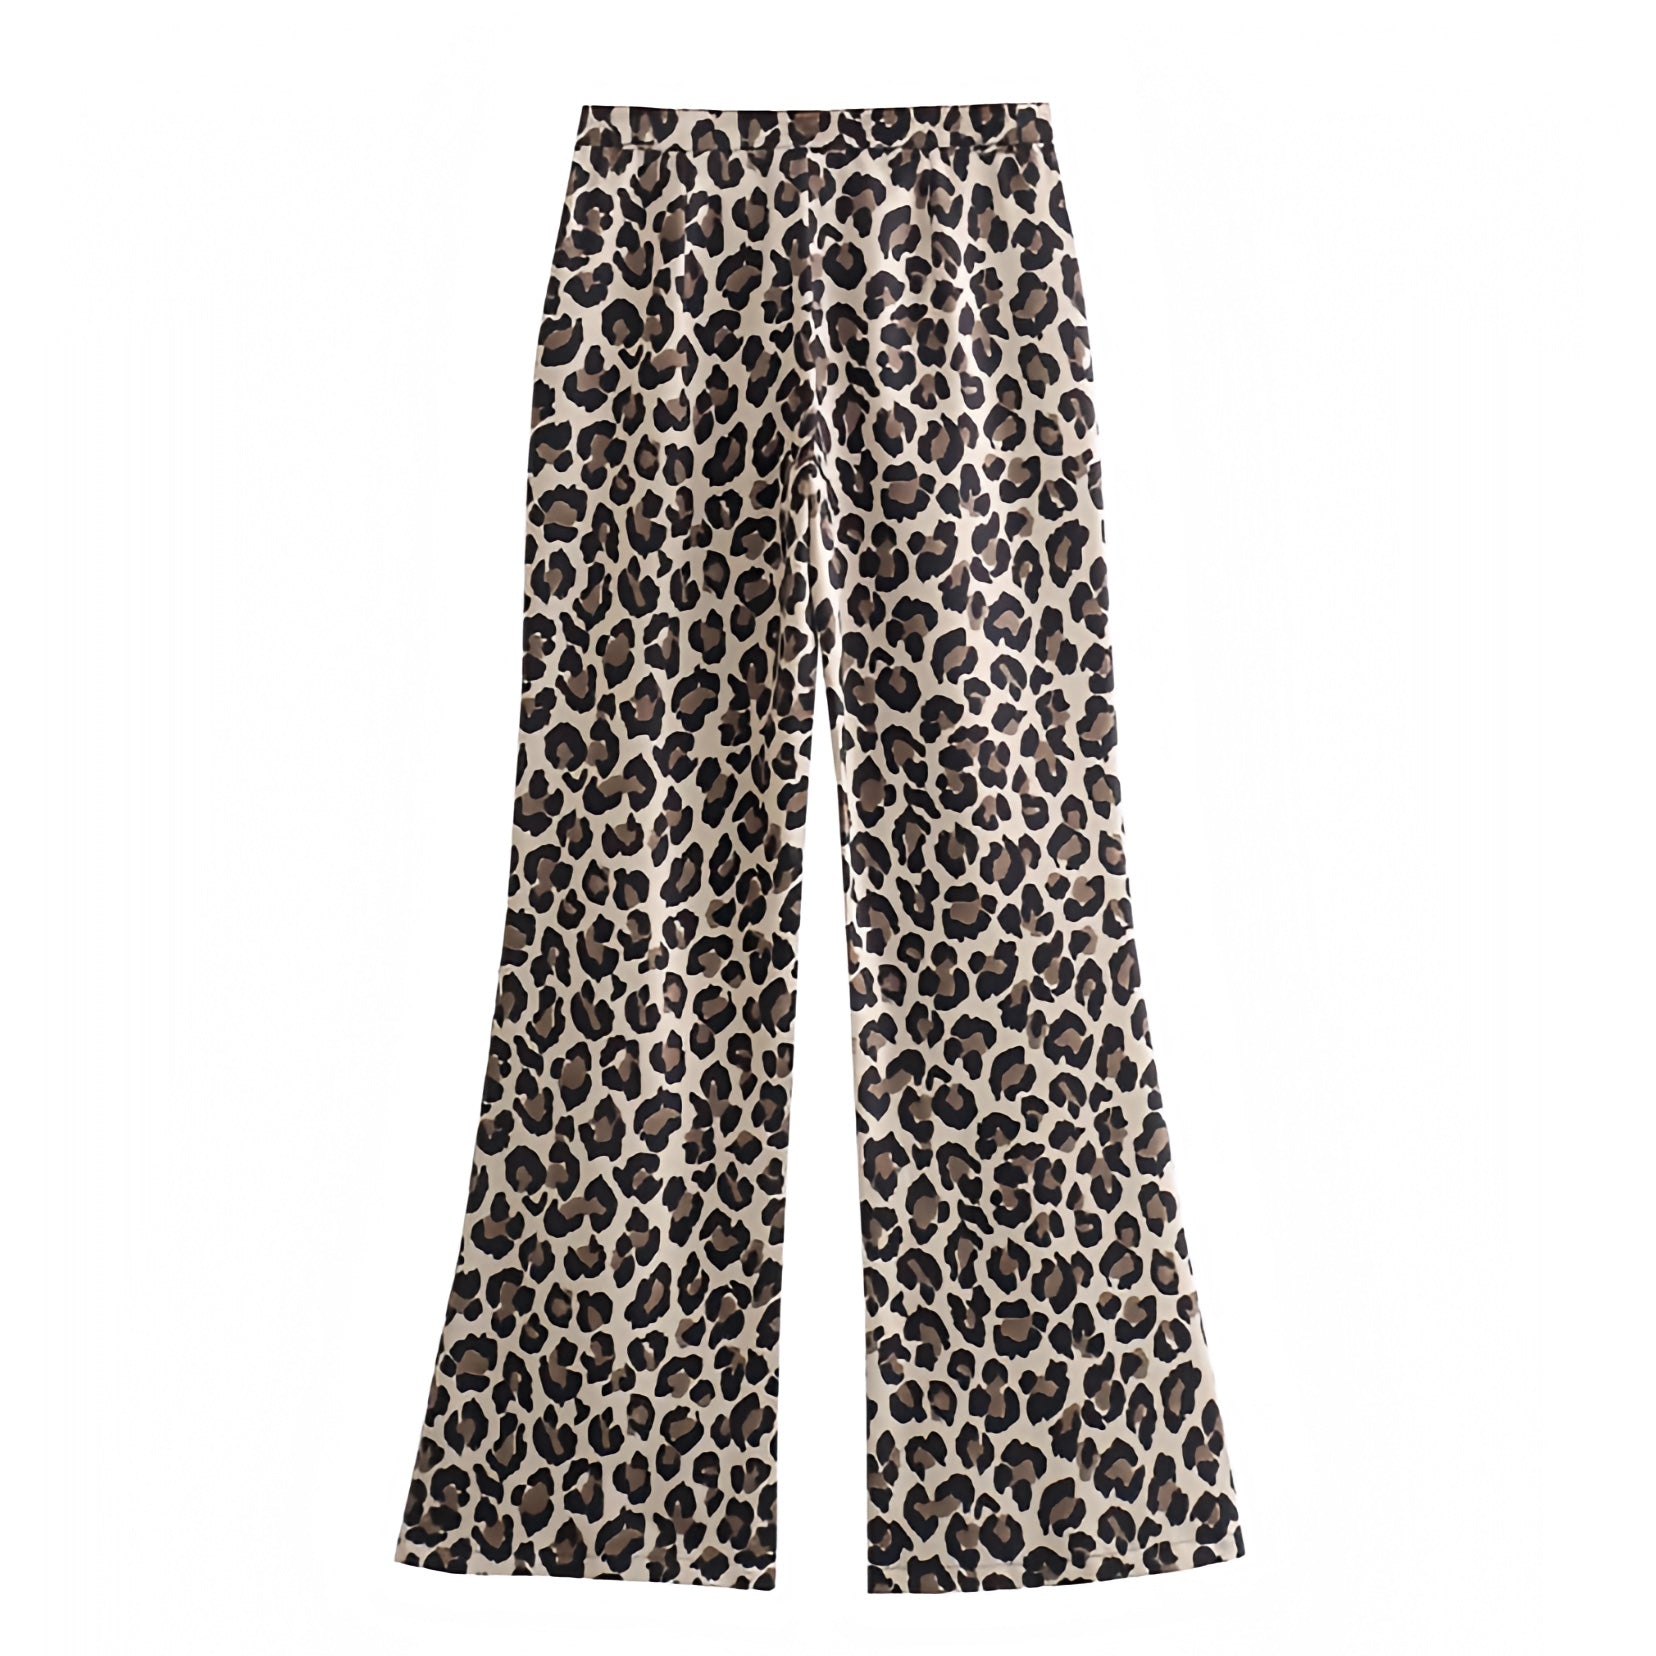 leopard-cheetah-animal-print-patterned-brown-black-multi-color-slim-fit-straight-leg-low-mid-high-rise-waisted-fitted-waist-flare-vintage-retro-trouser-pants-with-pockets-women-ladies-teens-tweens-chic-trendy-spring-2024-summer-casual-feminine-y2k-club-wear-sexy-party-night-out-2000s-office-siren-stockholm-style-zara-aritzia-revolve-reformation-dupe